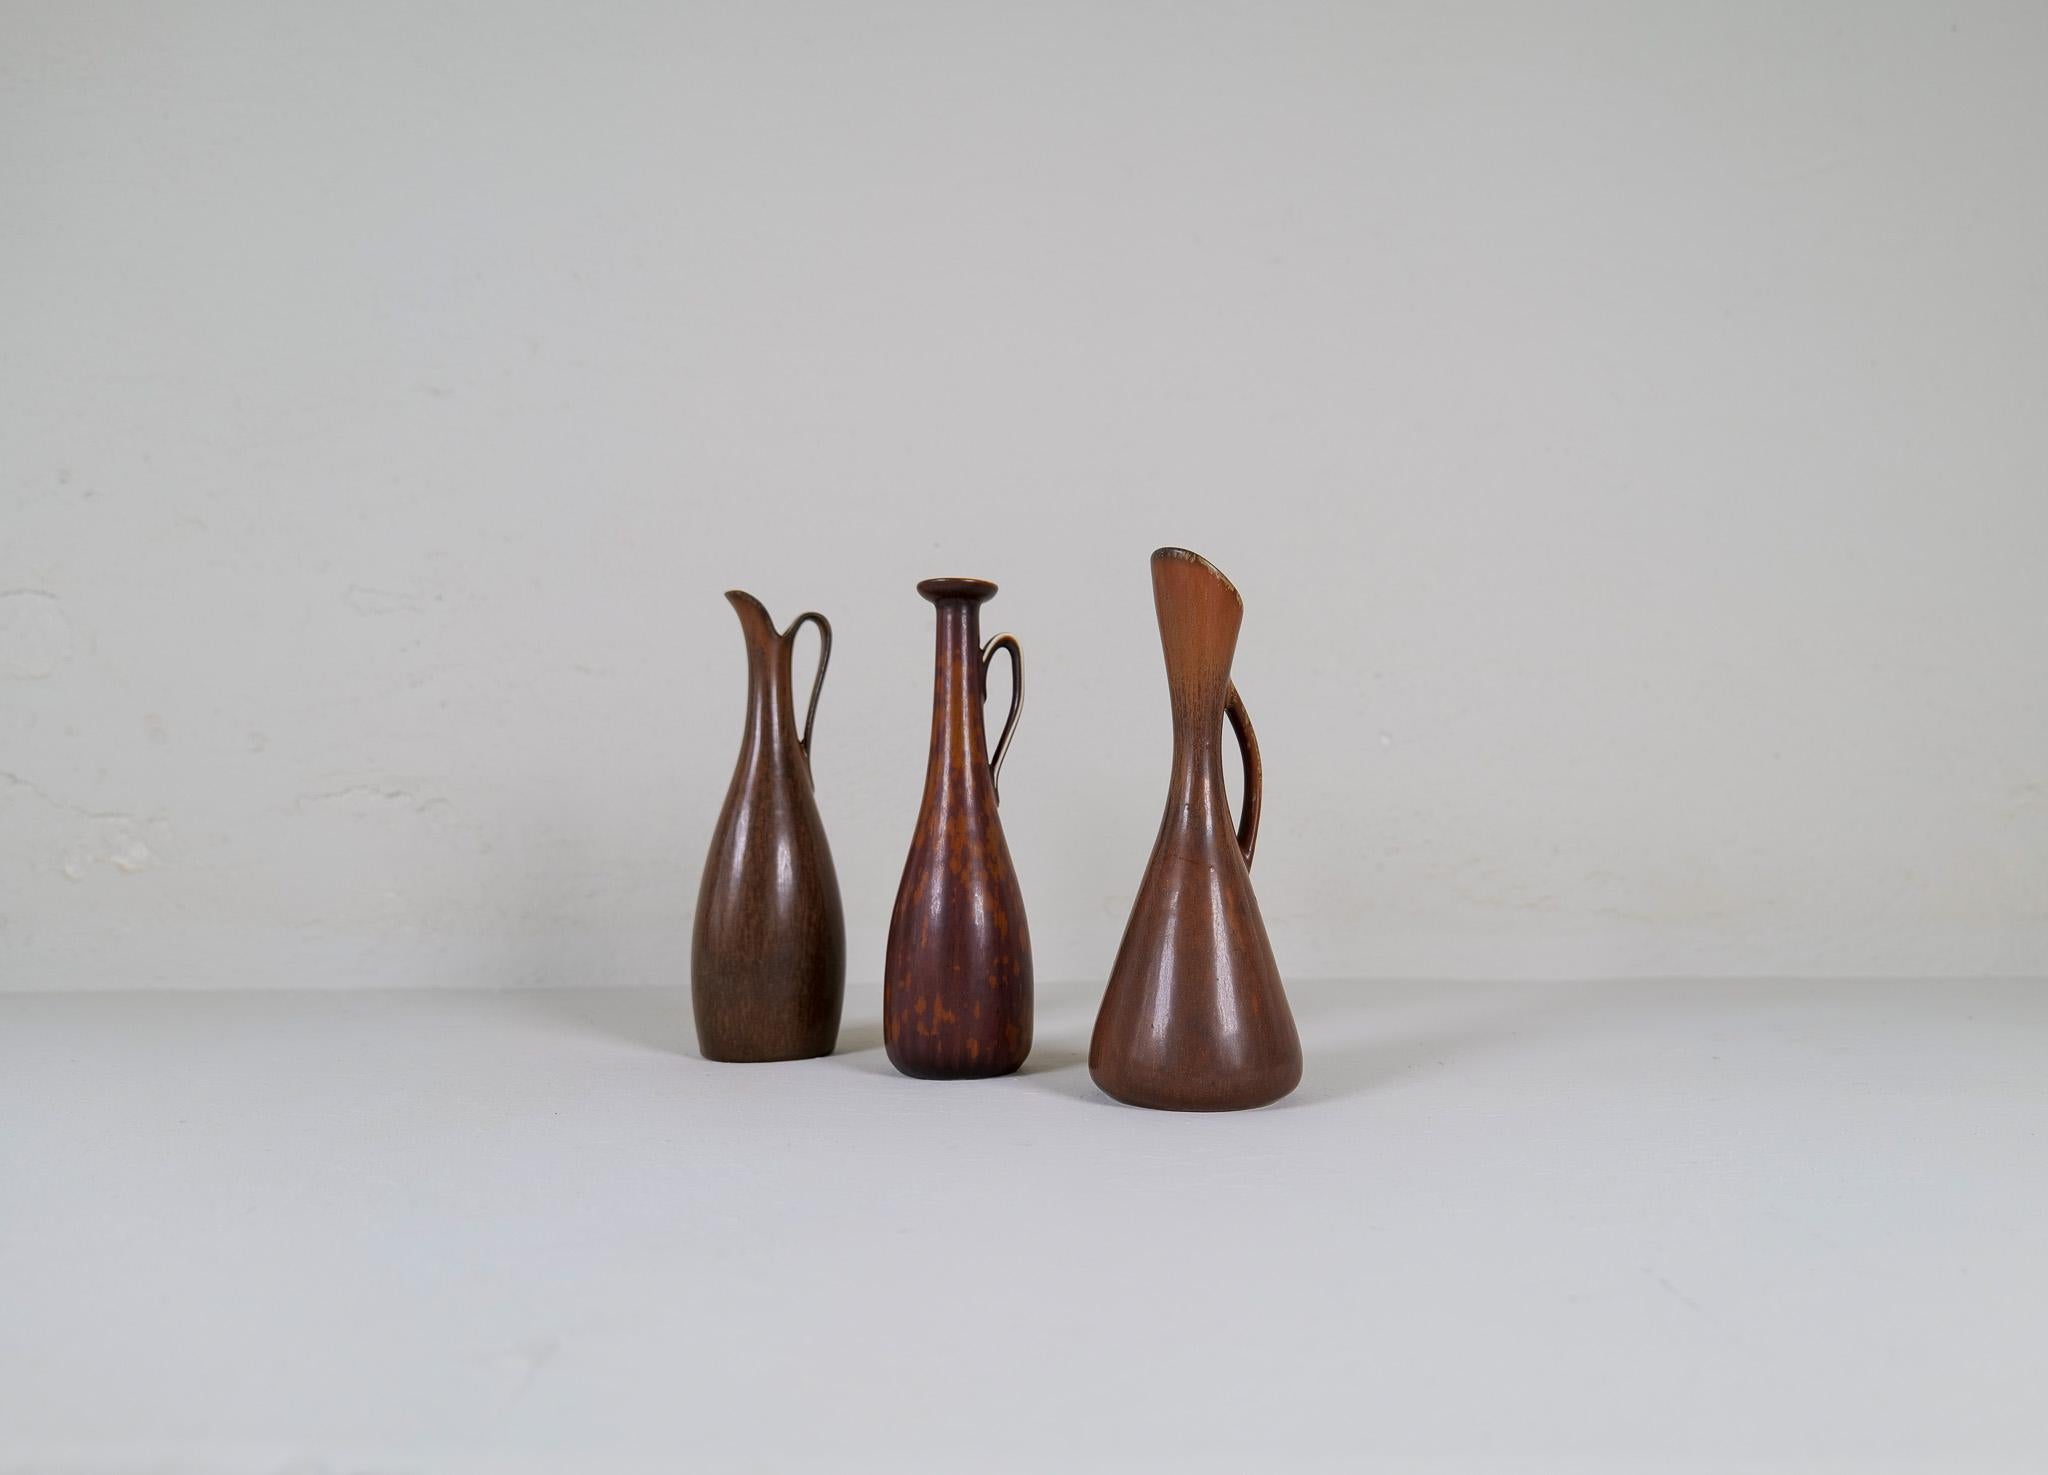 Three wonderful pieces/vases made in Sweden during the 1950s at Rörstrand factory and designed by Gunnar Nylund.
Great looking vases with that caracteristc harefur glaze. 

Good vintage condition. 

Dimensions H 23cm D 10 cm.